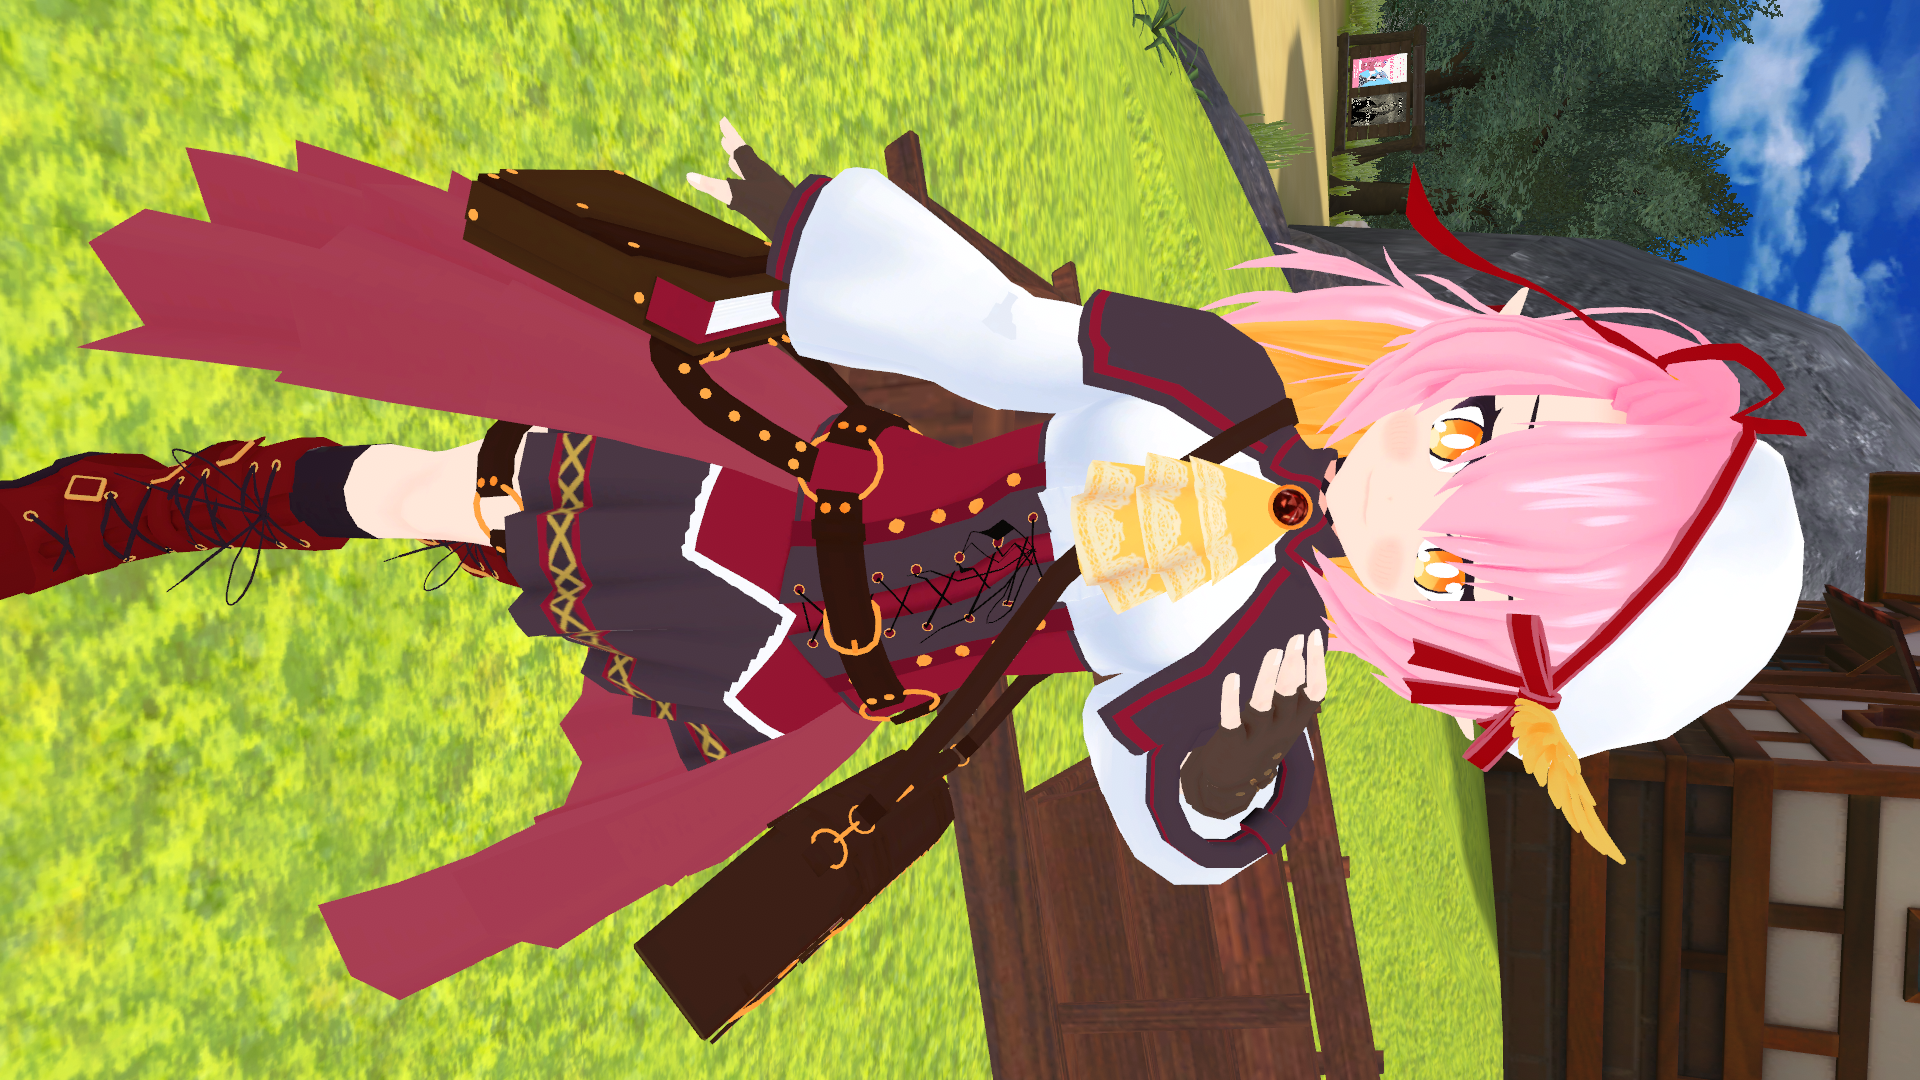 VRChat_1920x1080_2021-12-05_02-27-04.310.png